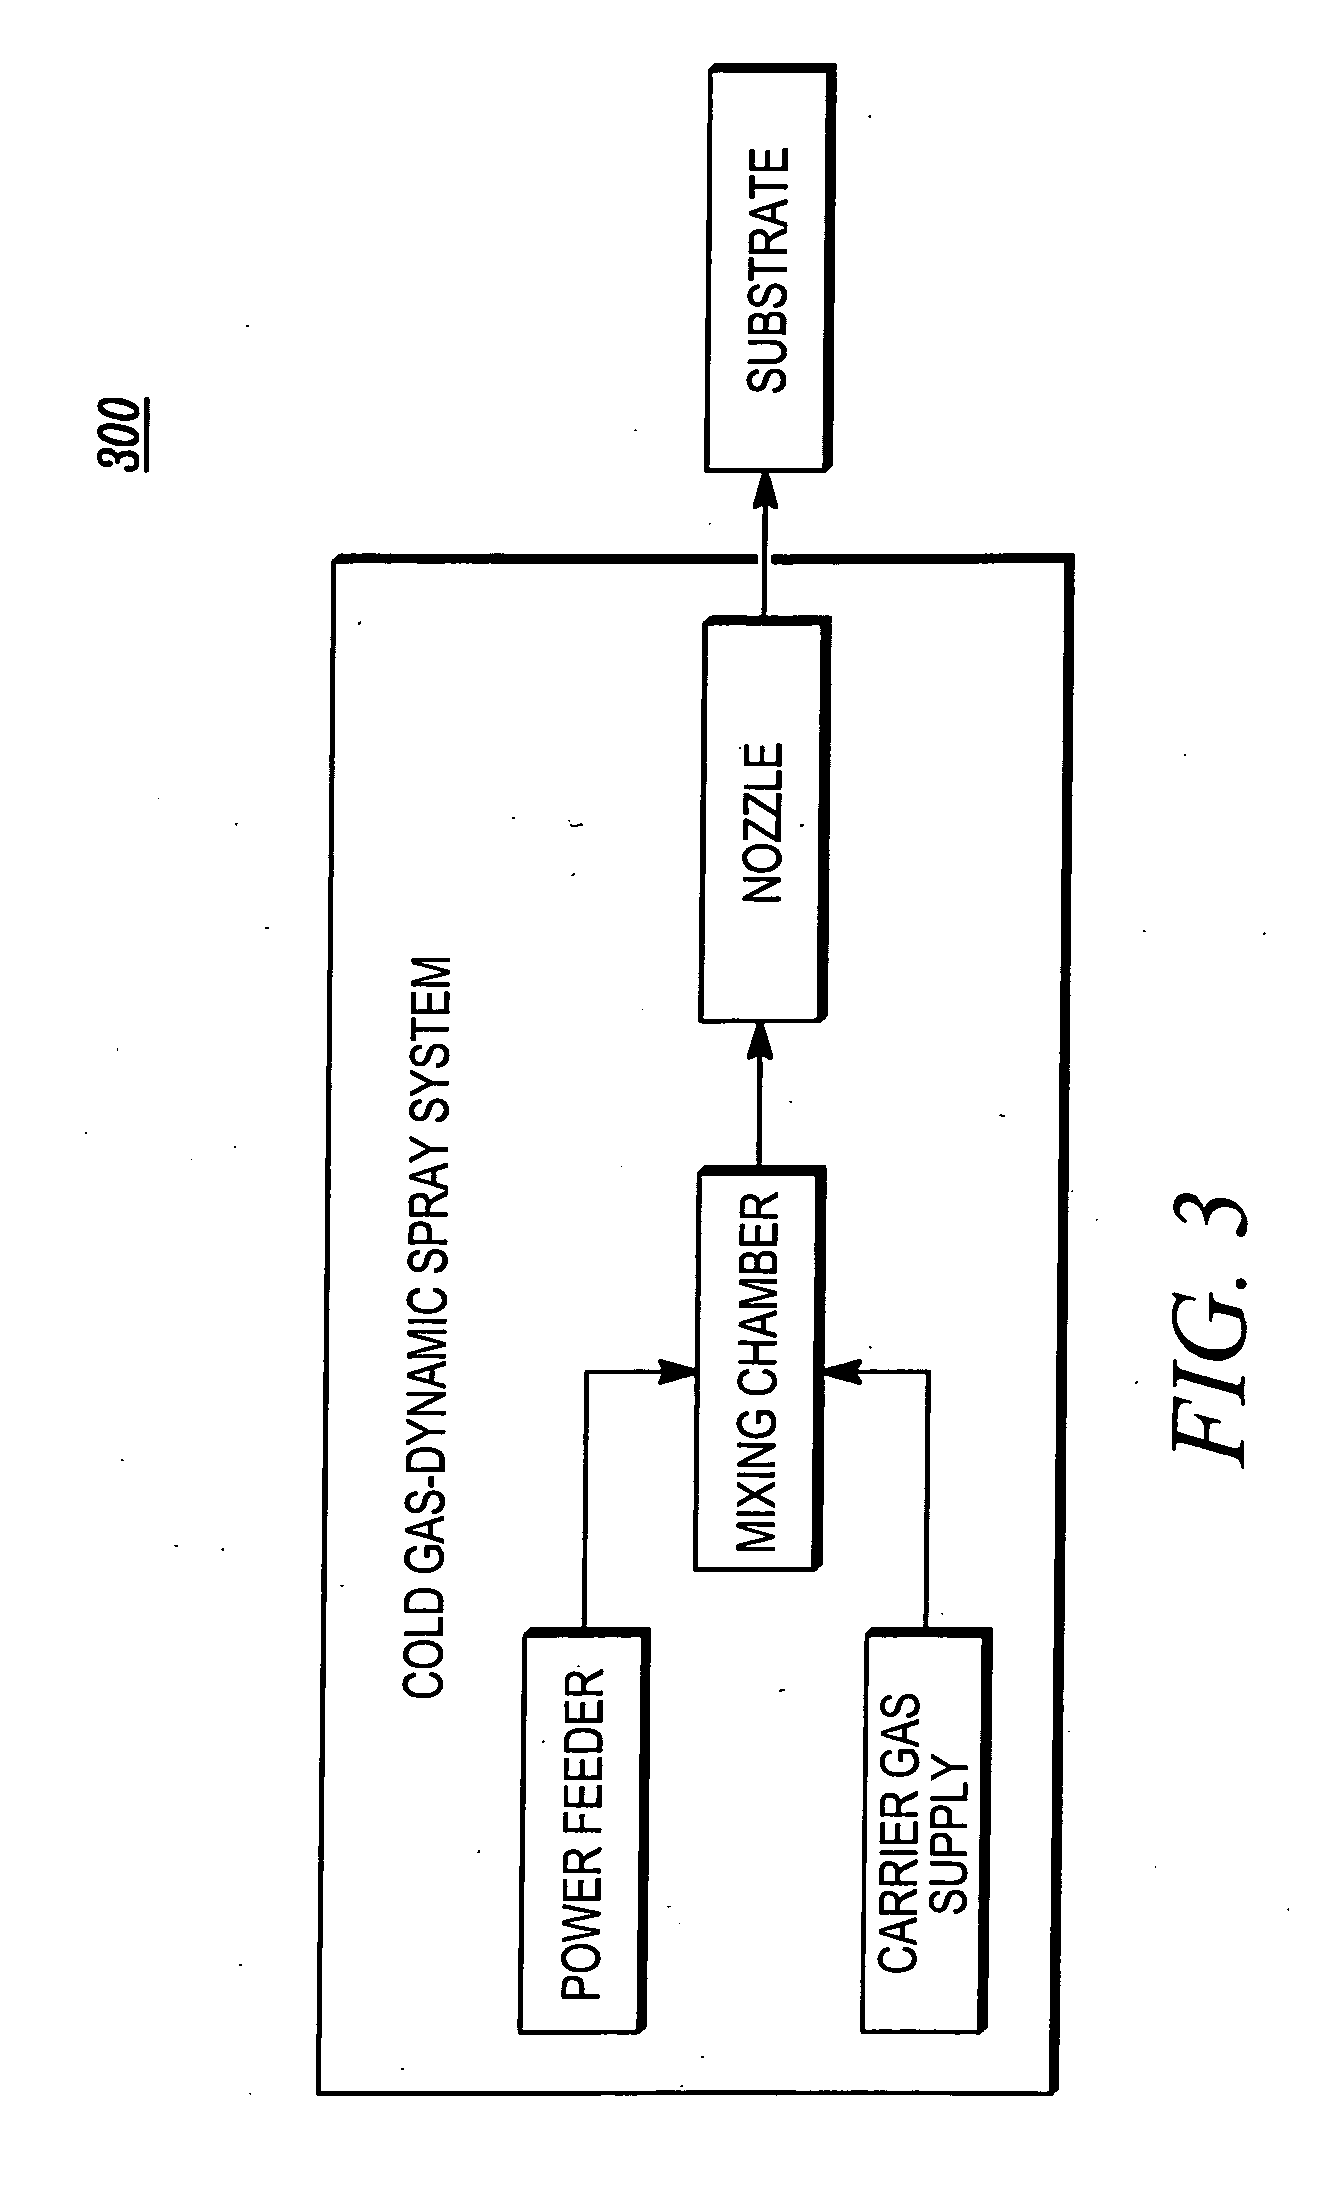 Method for making an environment-resistant and thermal barrier coating system on a component